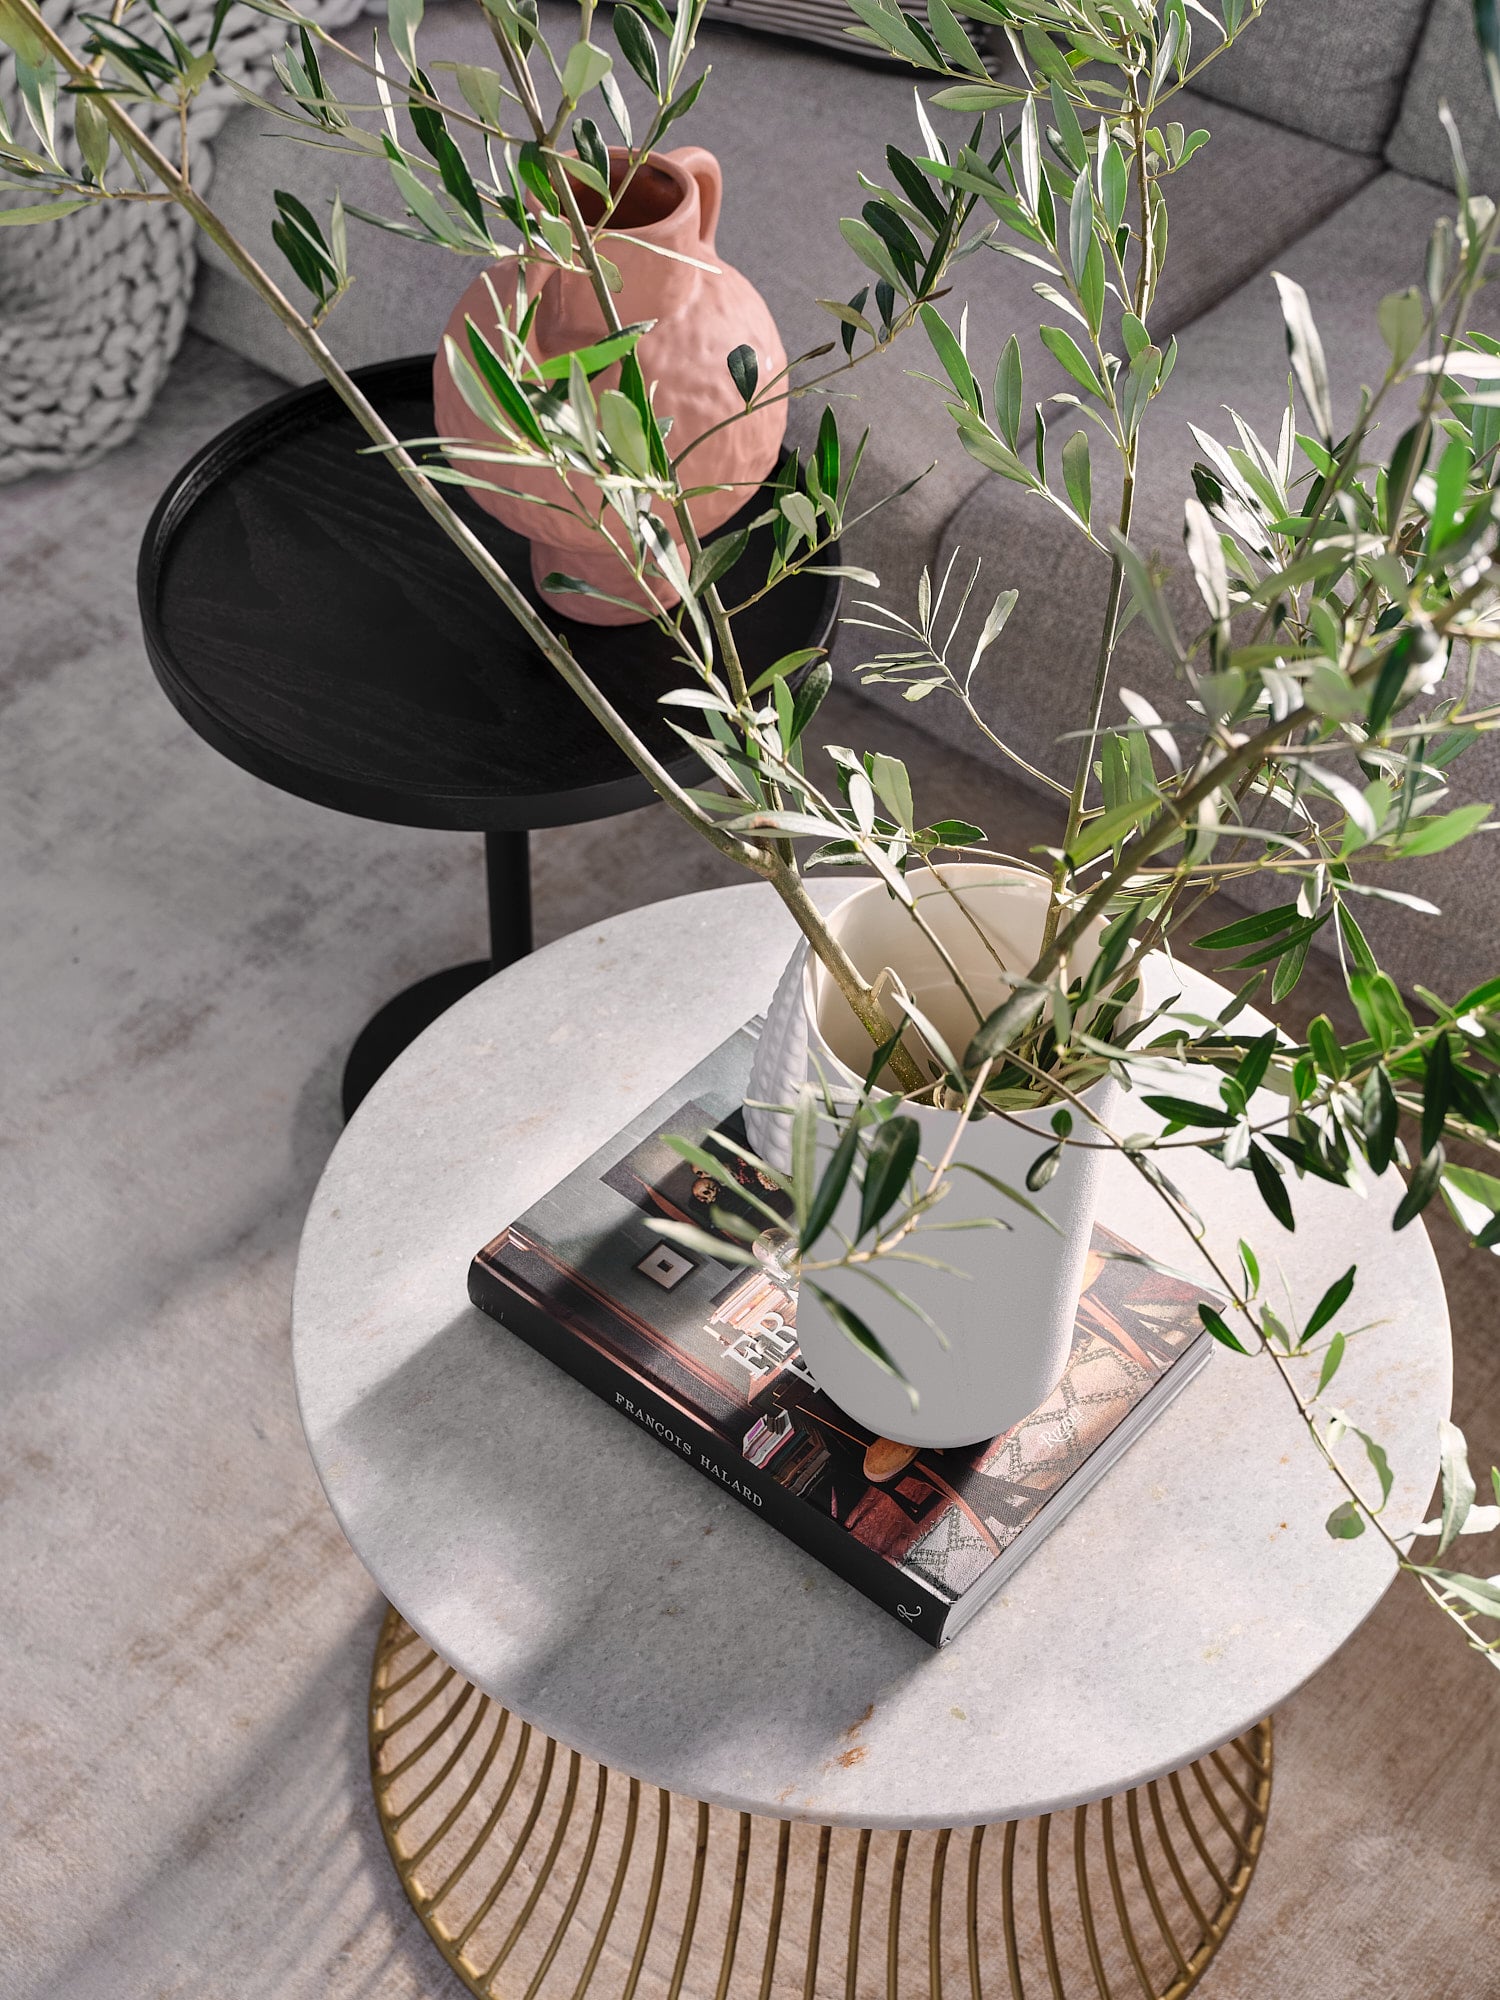 detail shot of a round coffee table with a vase and book on it